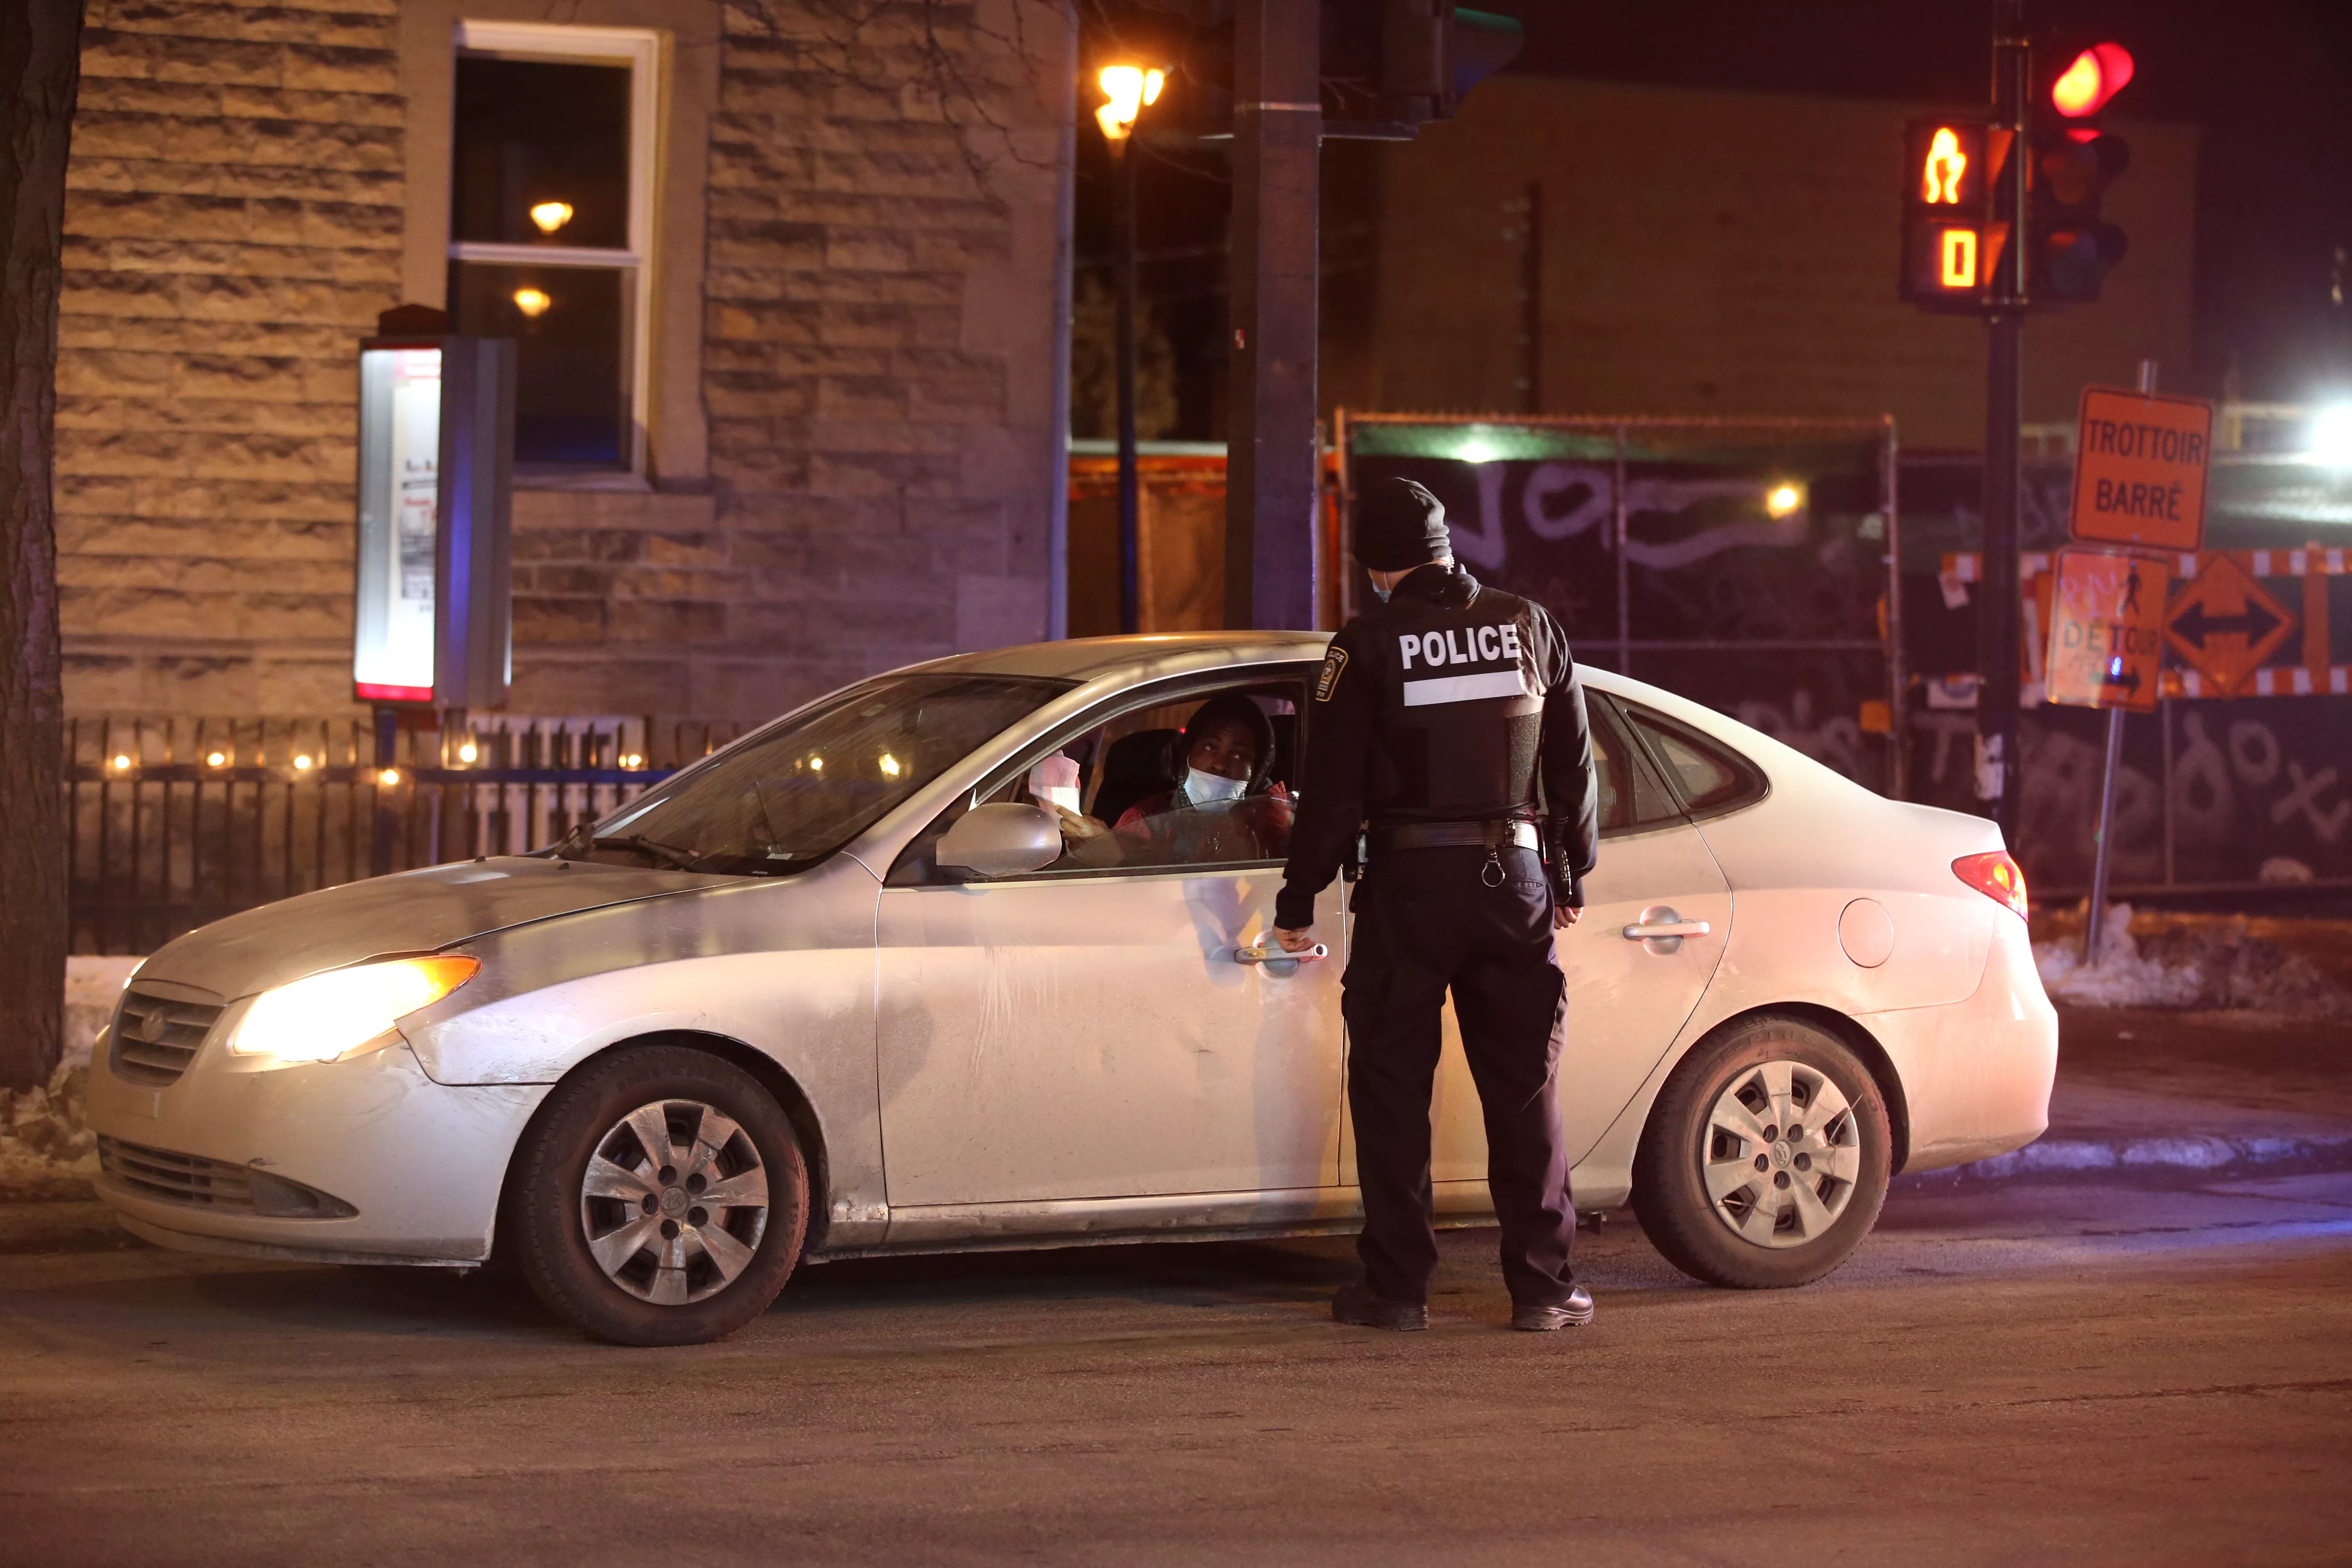 police-ticket-a-vehicle-as-they-enforce-a-night-curfew-imposed-by-the-quebec-government